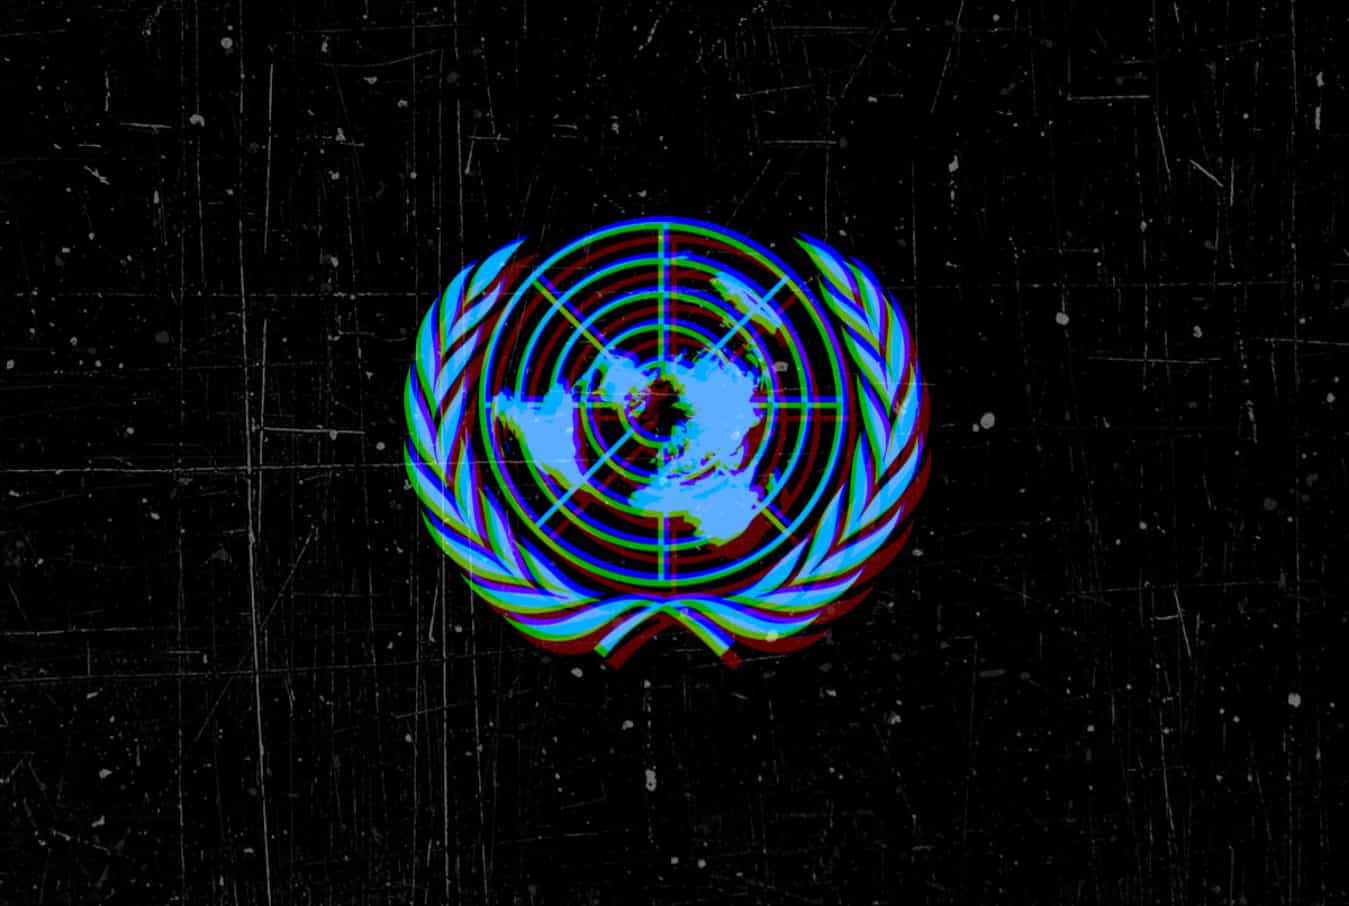 UN hacked becomes target of Massive State-Sponsored Spying Operation